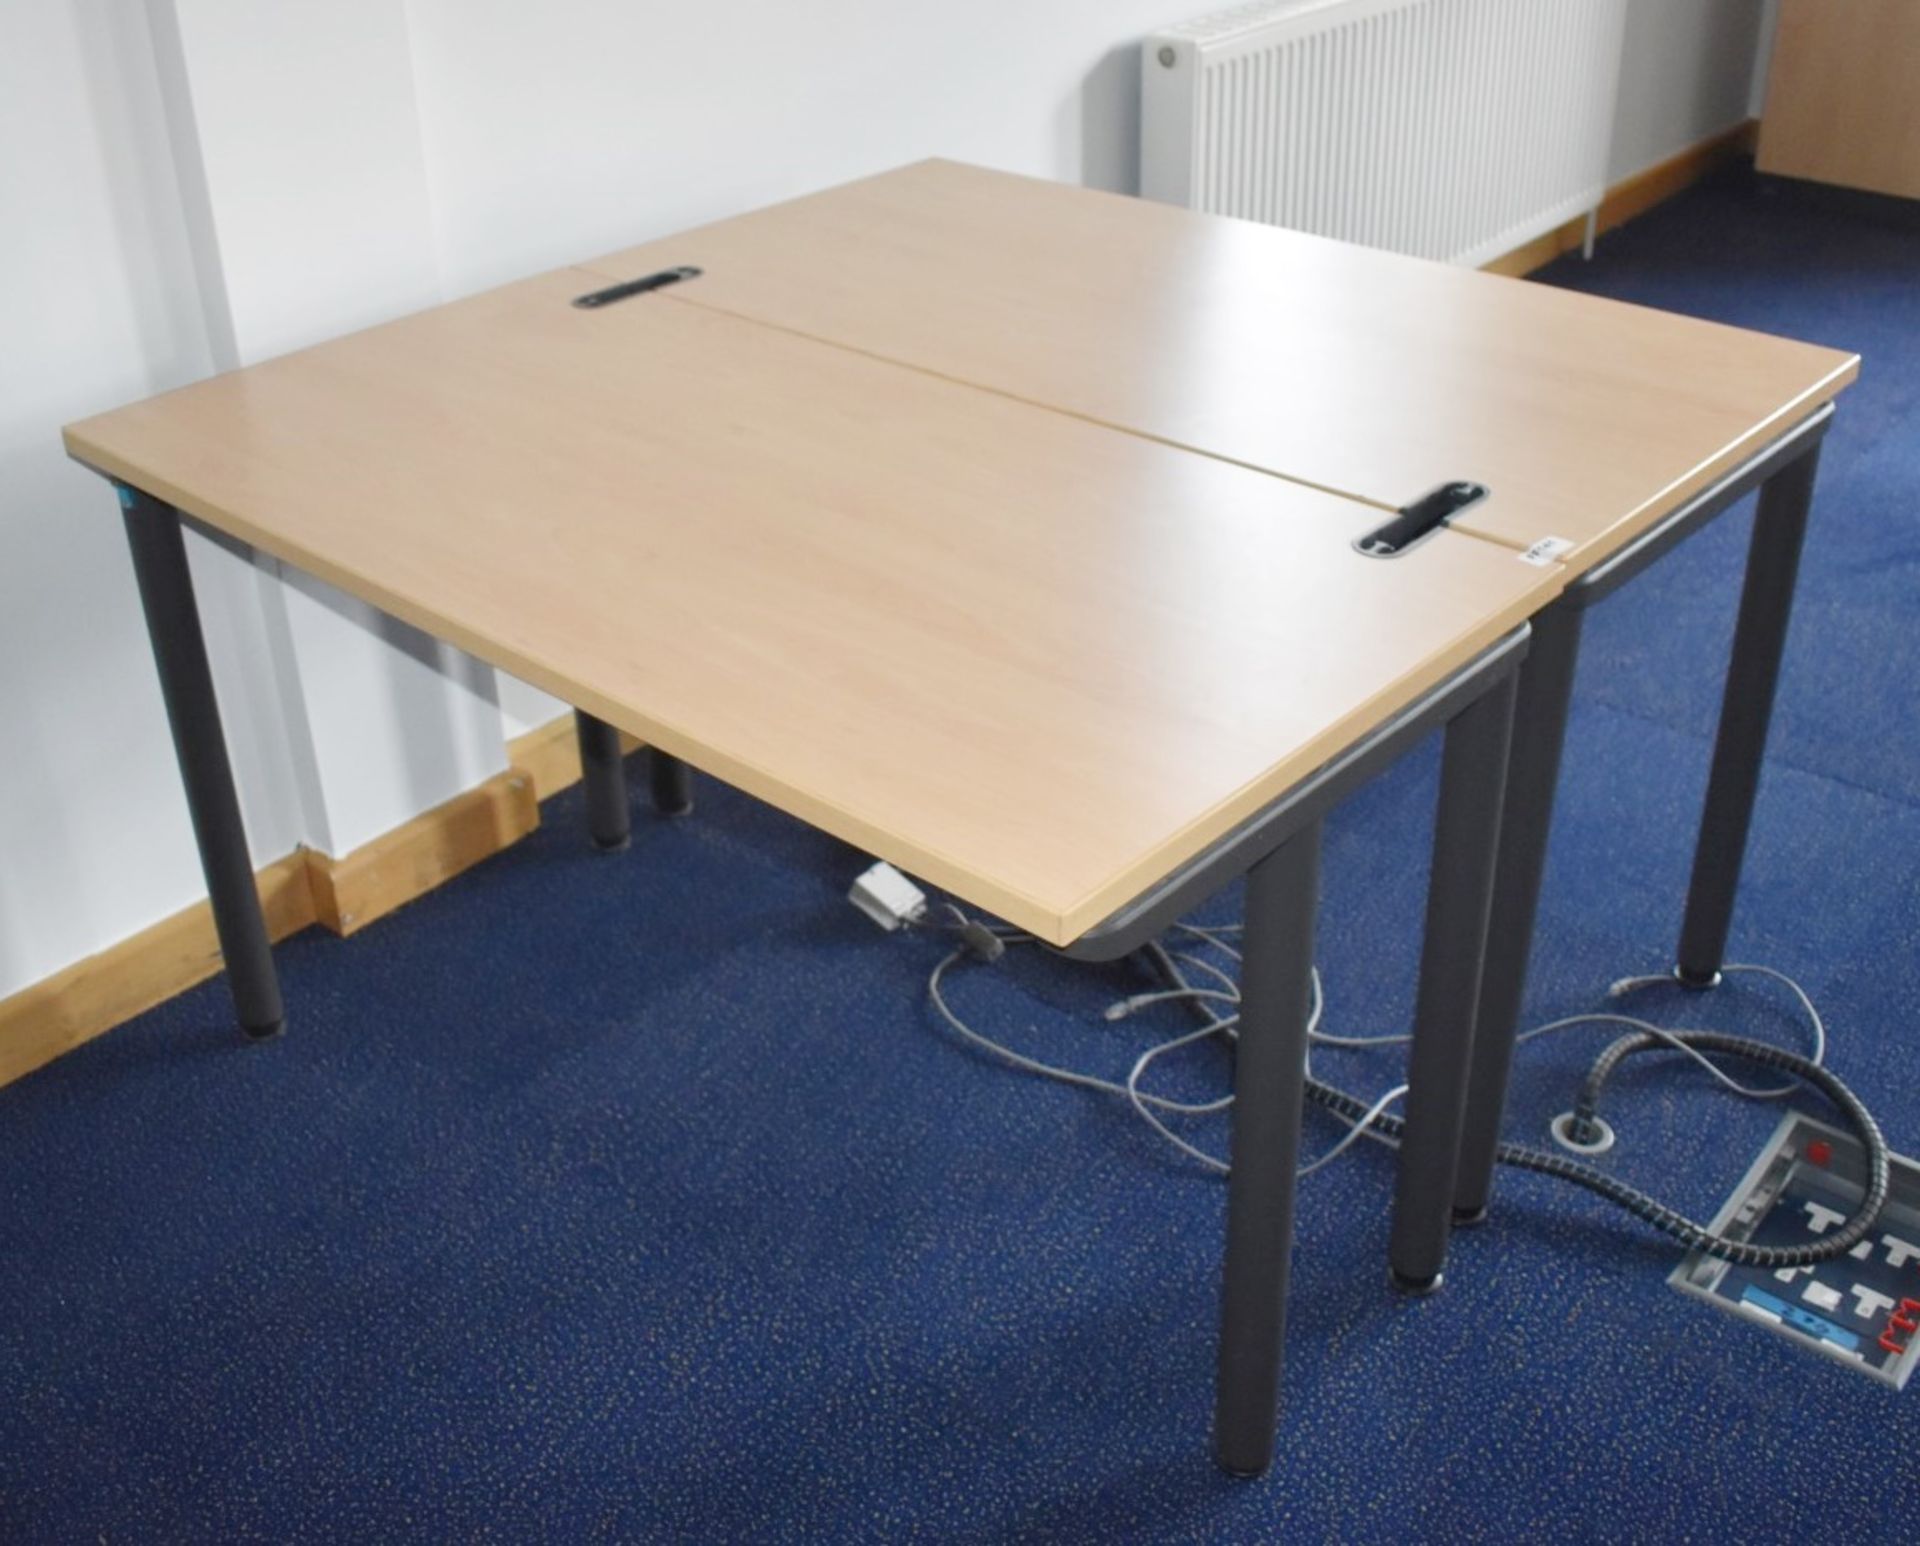 2 x Beech Office Desks With Metal Bases and Cable Tidy Inserts - H72 x W120 x D60 cms - Ref: FF141 U